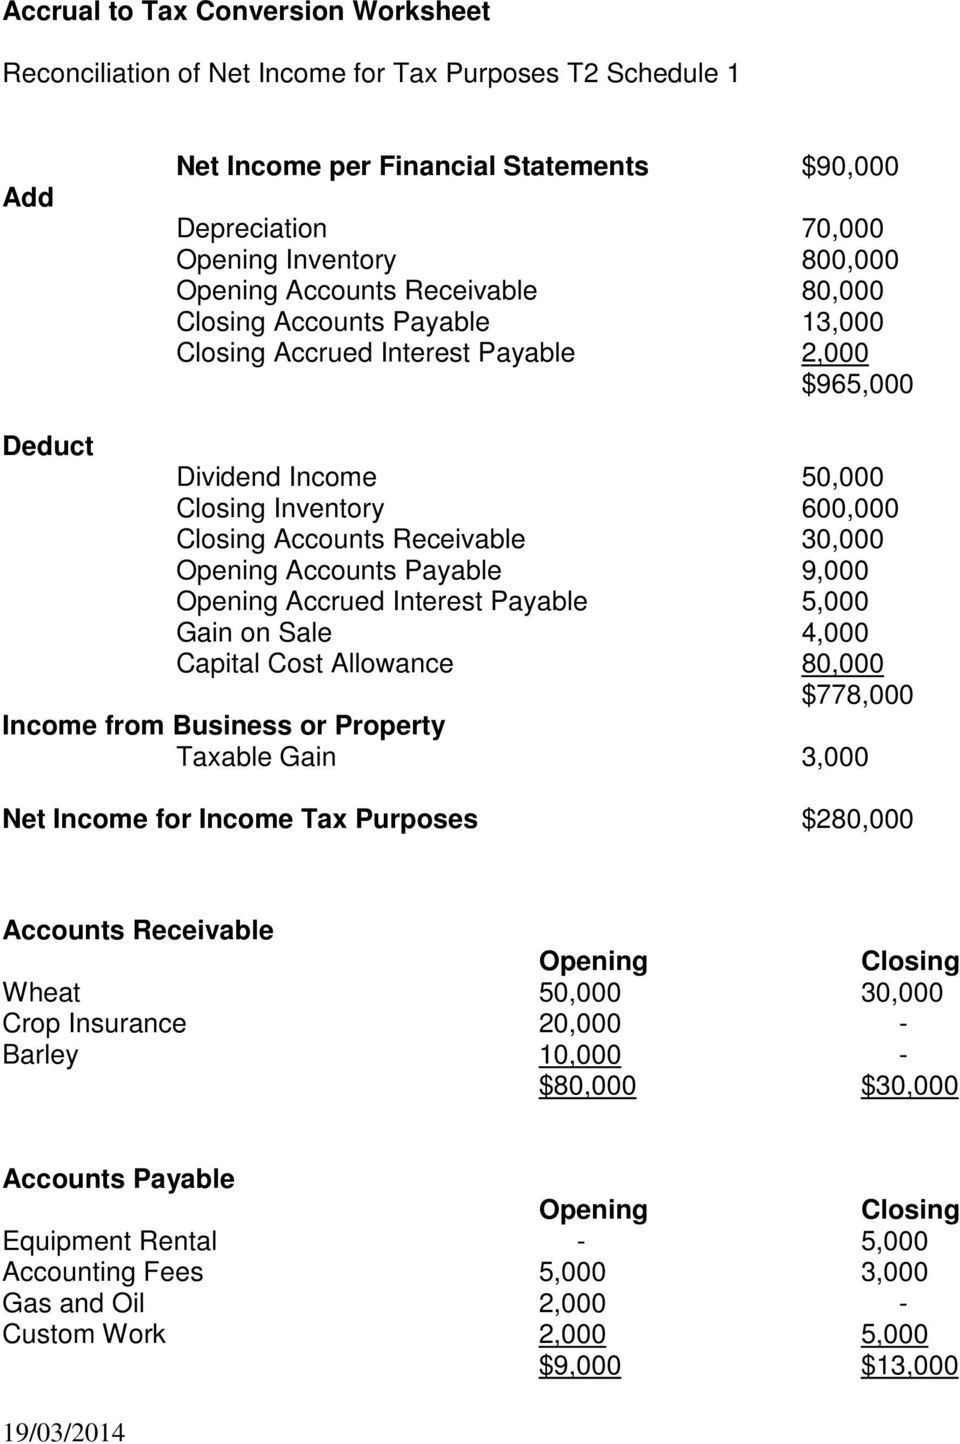 Opening Accounts Payable 9,000 Opening Accrued Interest Payable 5,000 Gain on Sale 4,000 Capital Cost Allowance 80,000 $778,000 Income from Business or Property Taxable Gain 3,000 Net Income for